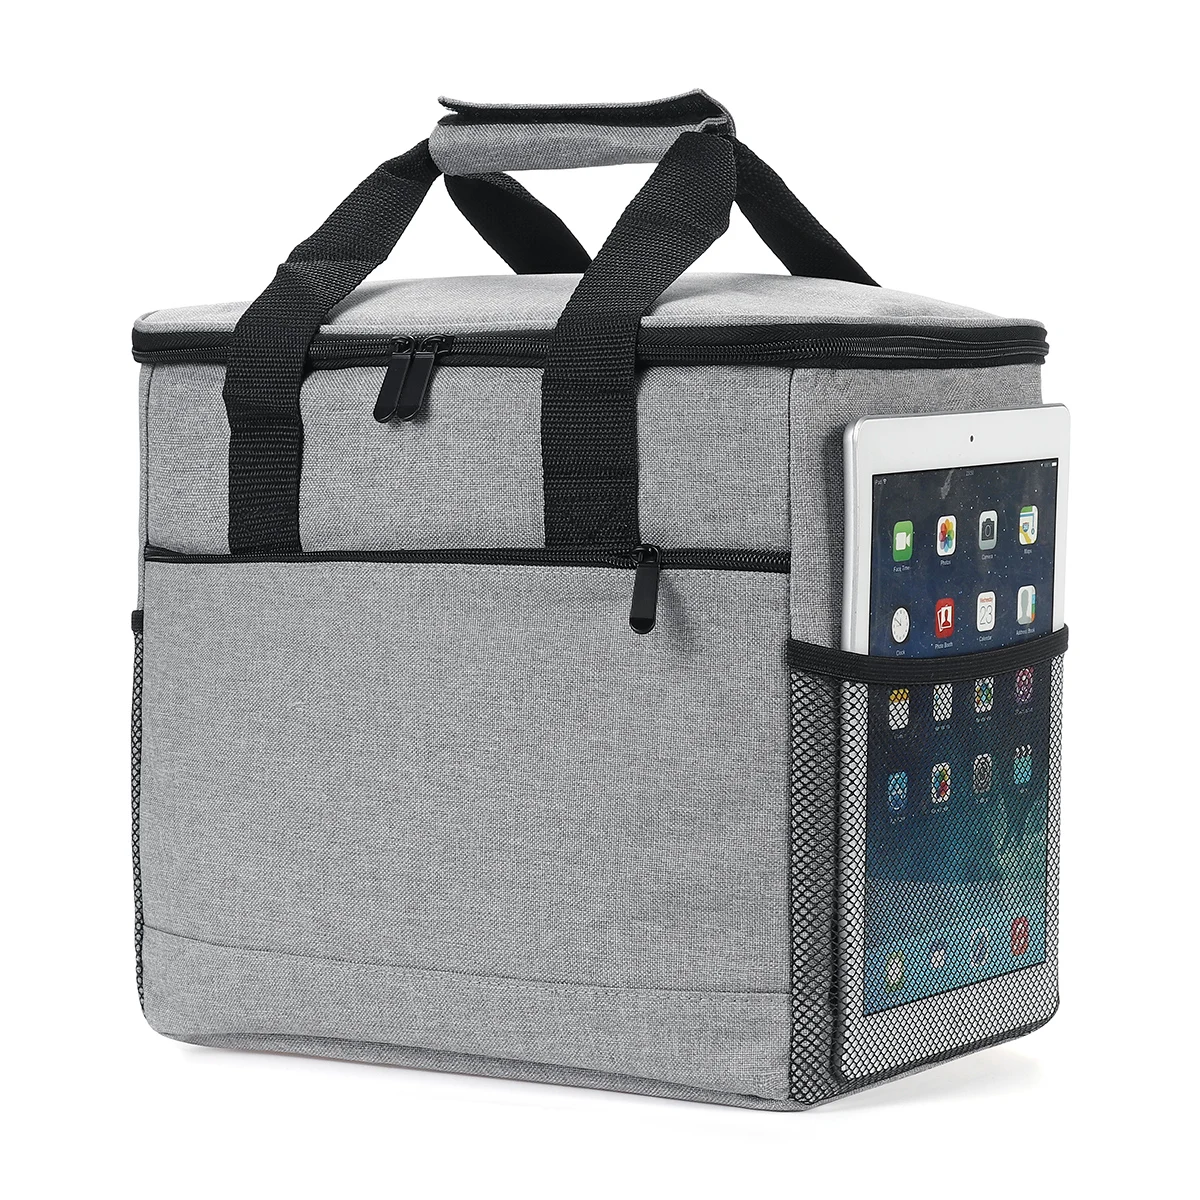 

Insulated Lunch Bag Thermal Cooler Box Coolbag Wide-Open Food Storage Lunchbox Large Cool Drink Holder For Outdoor Picnic Party